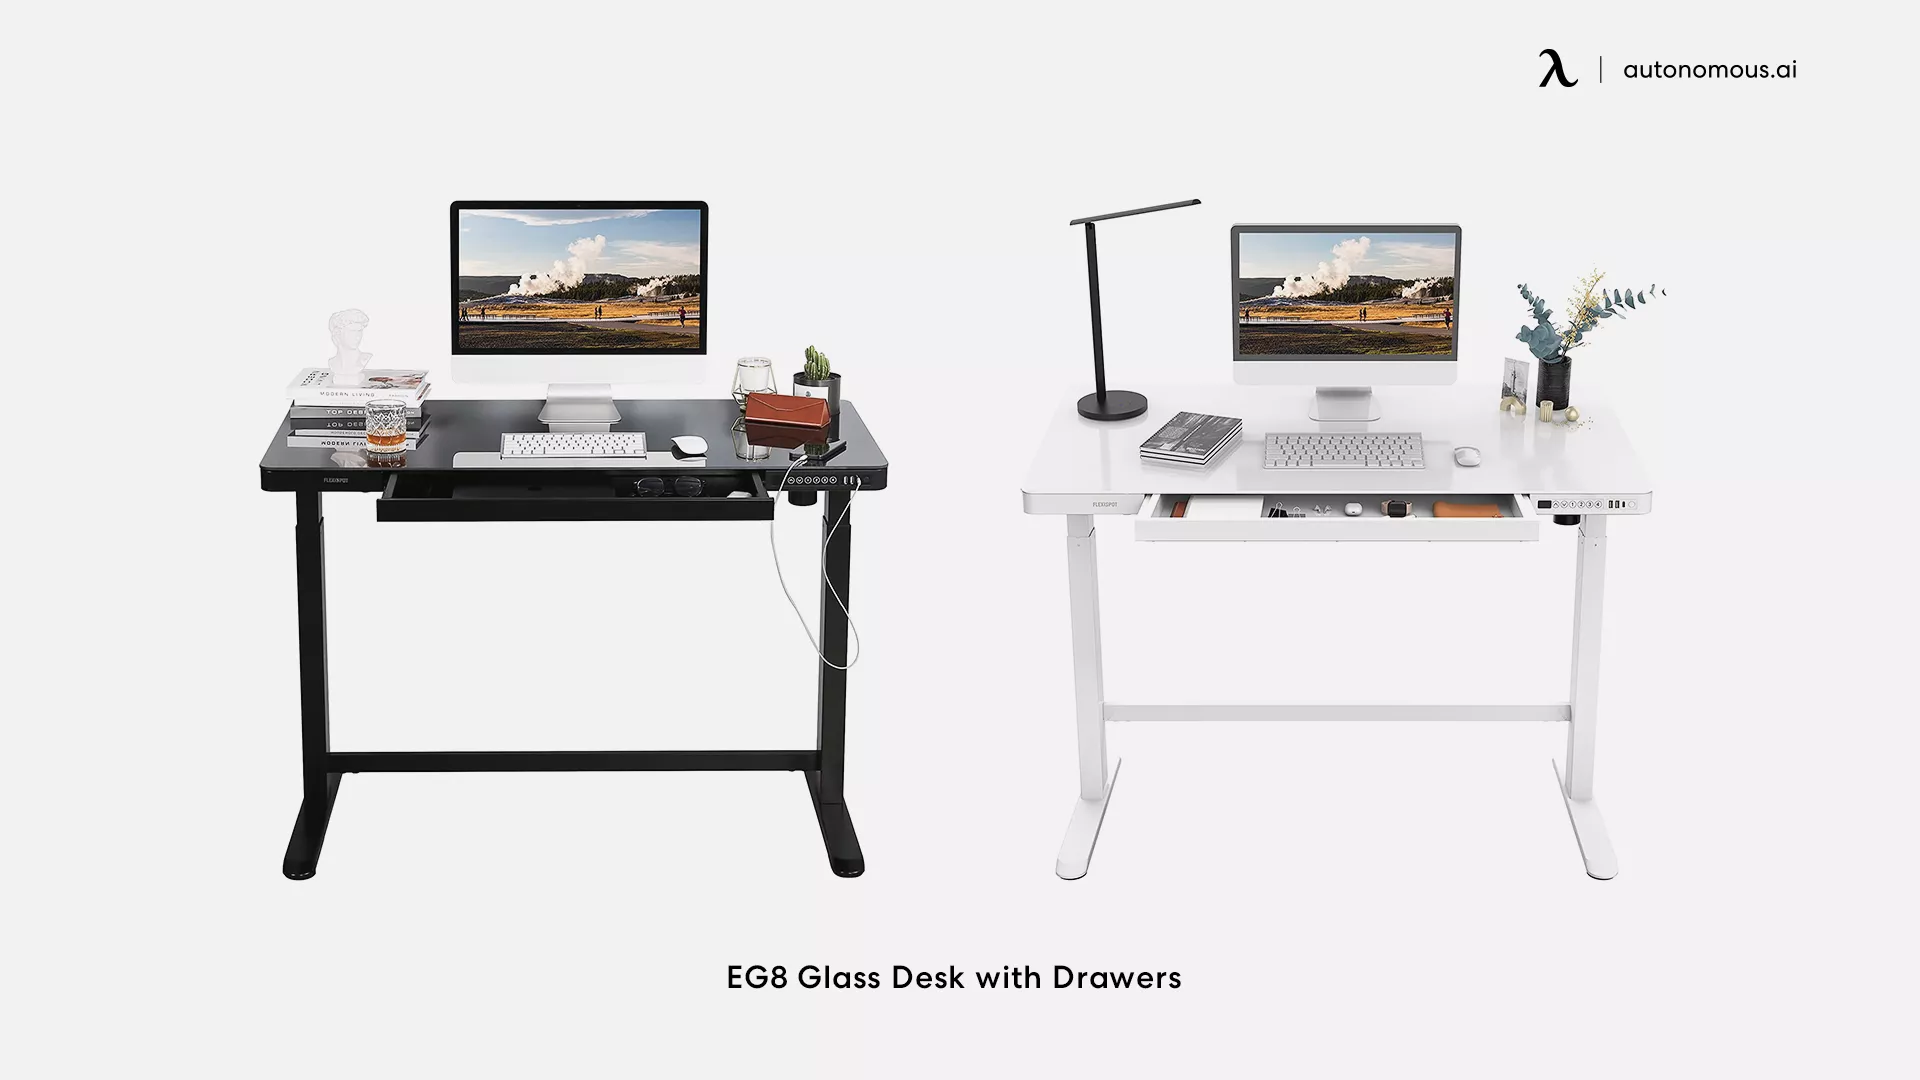 EG8 Glass Desk with Drawers